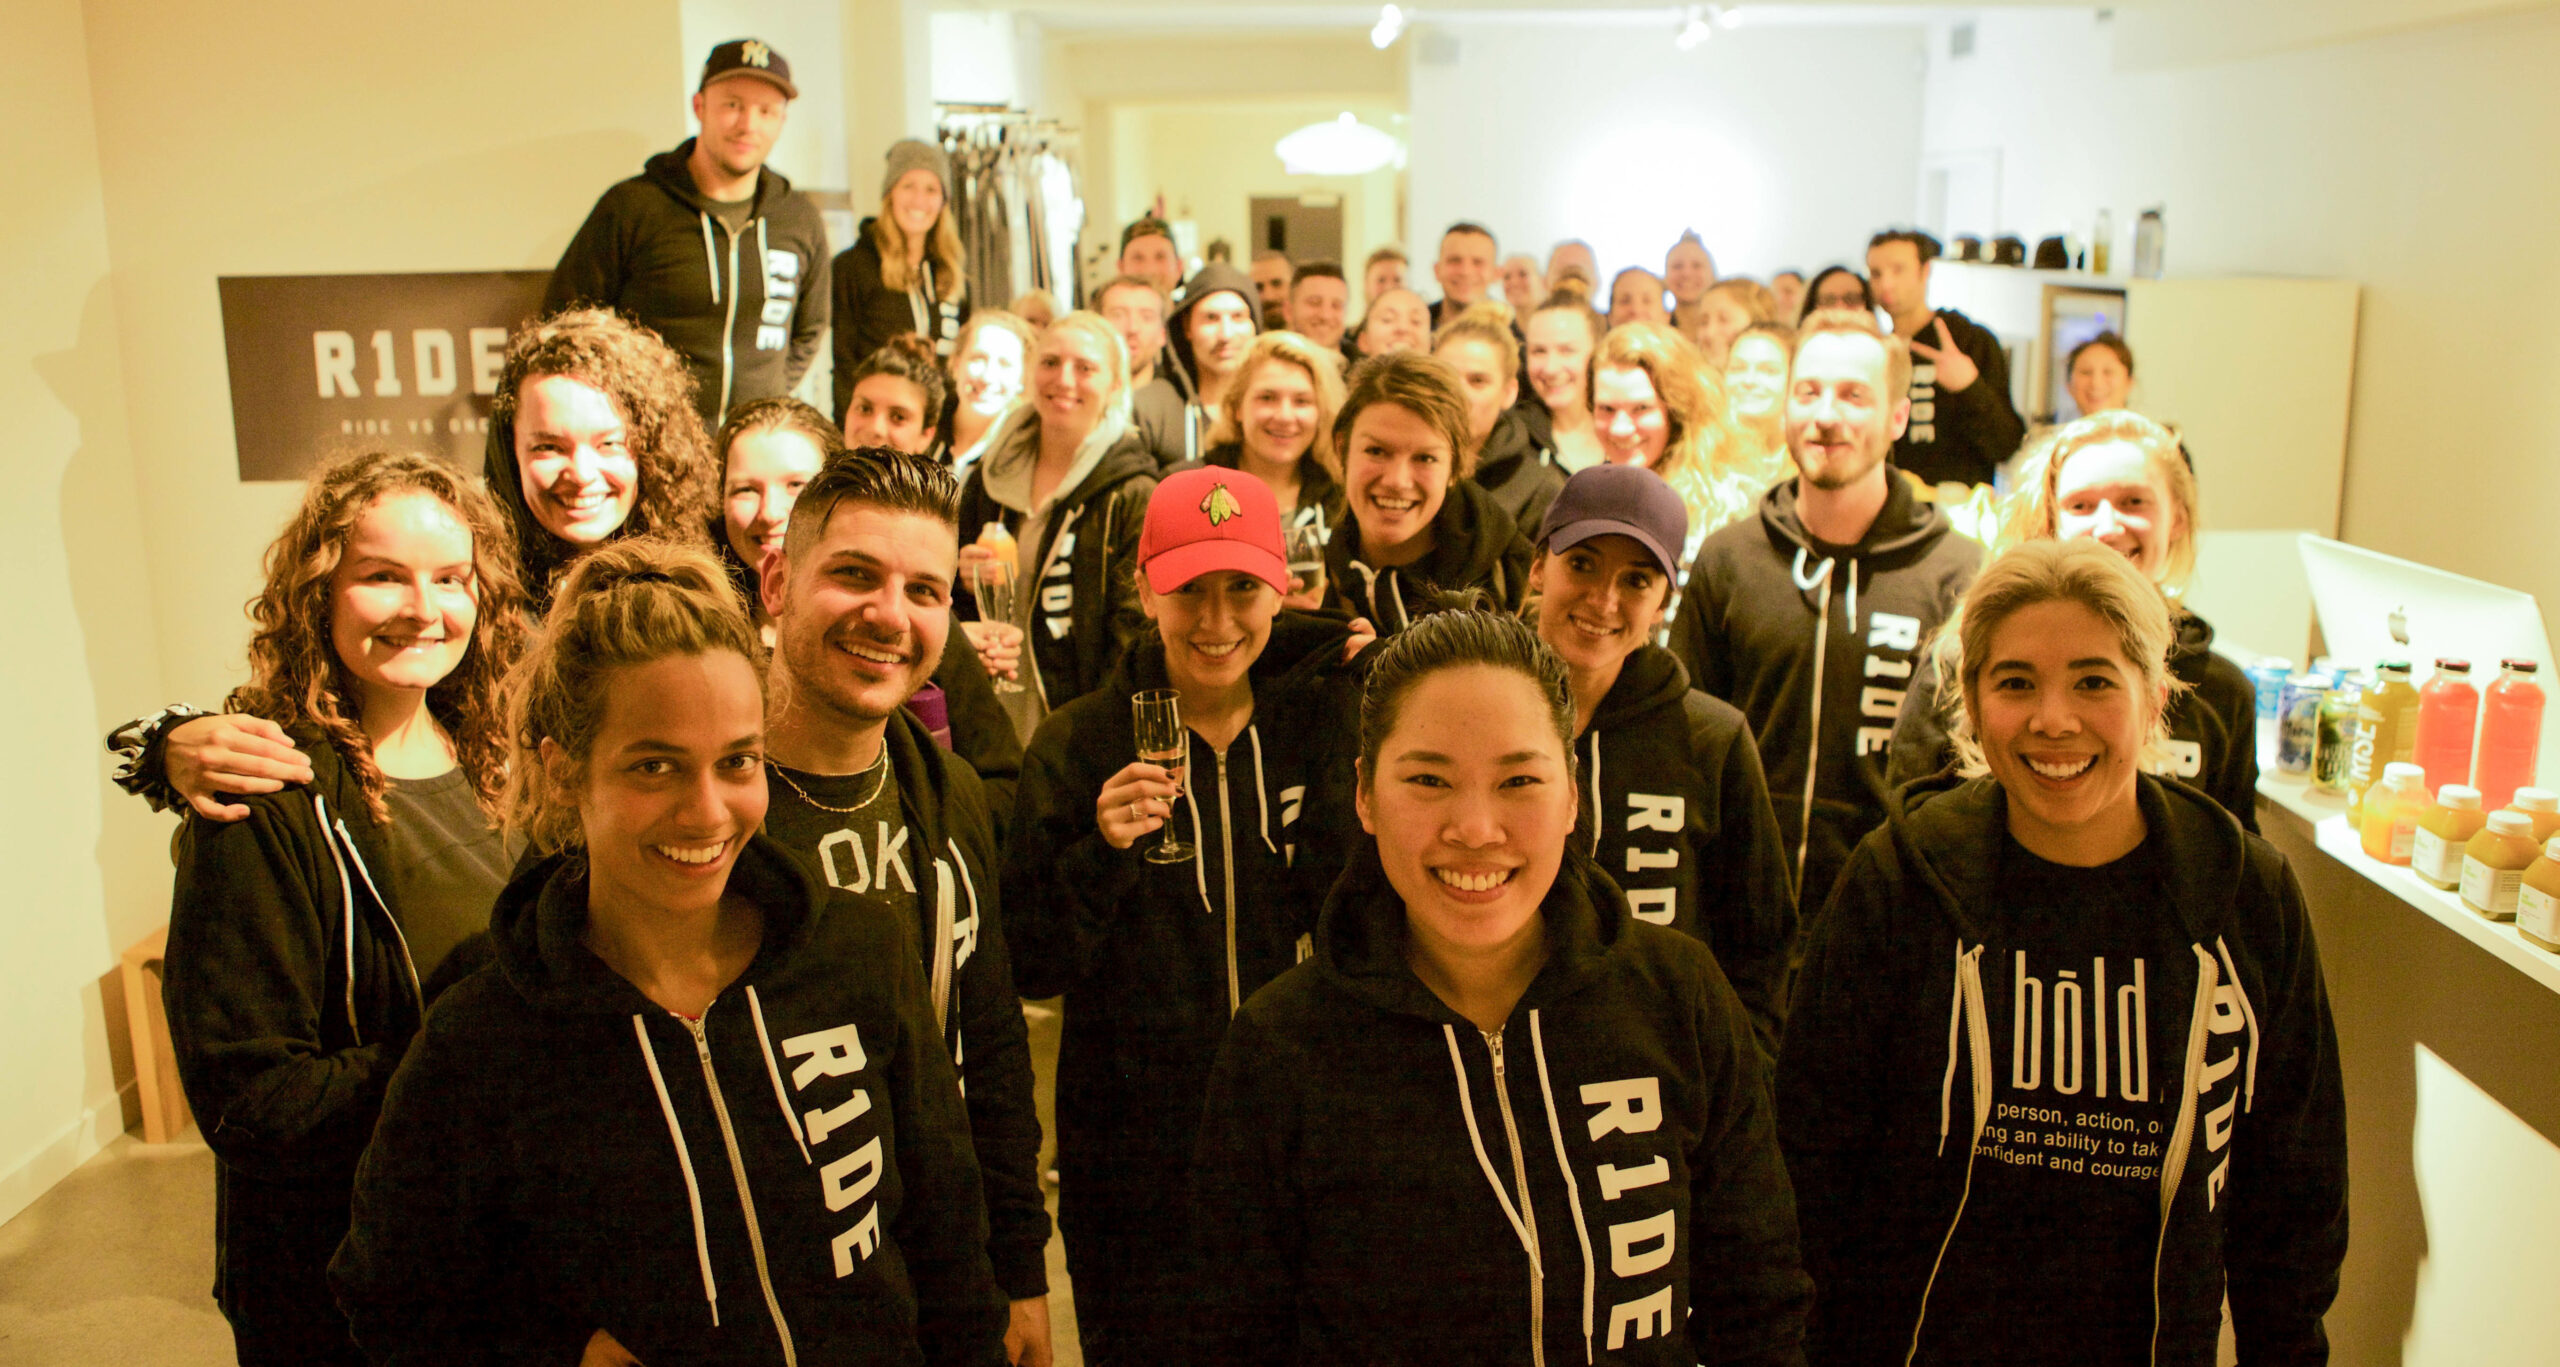 The 40 riders who took part in RIDE vs ONE in Vancouver in November 2015.